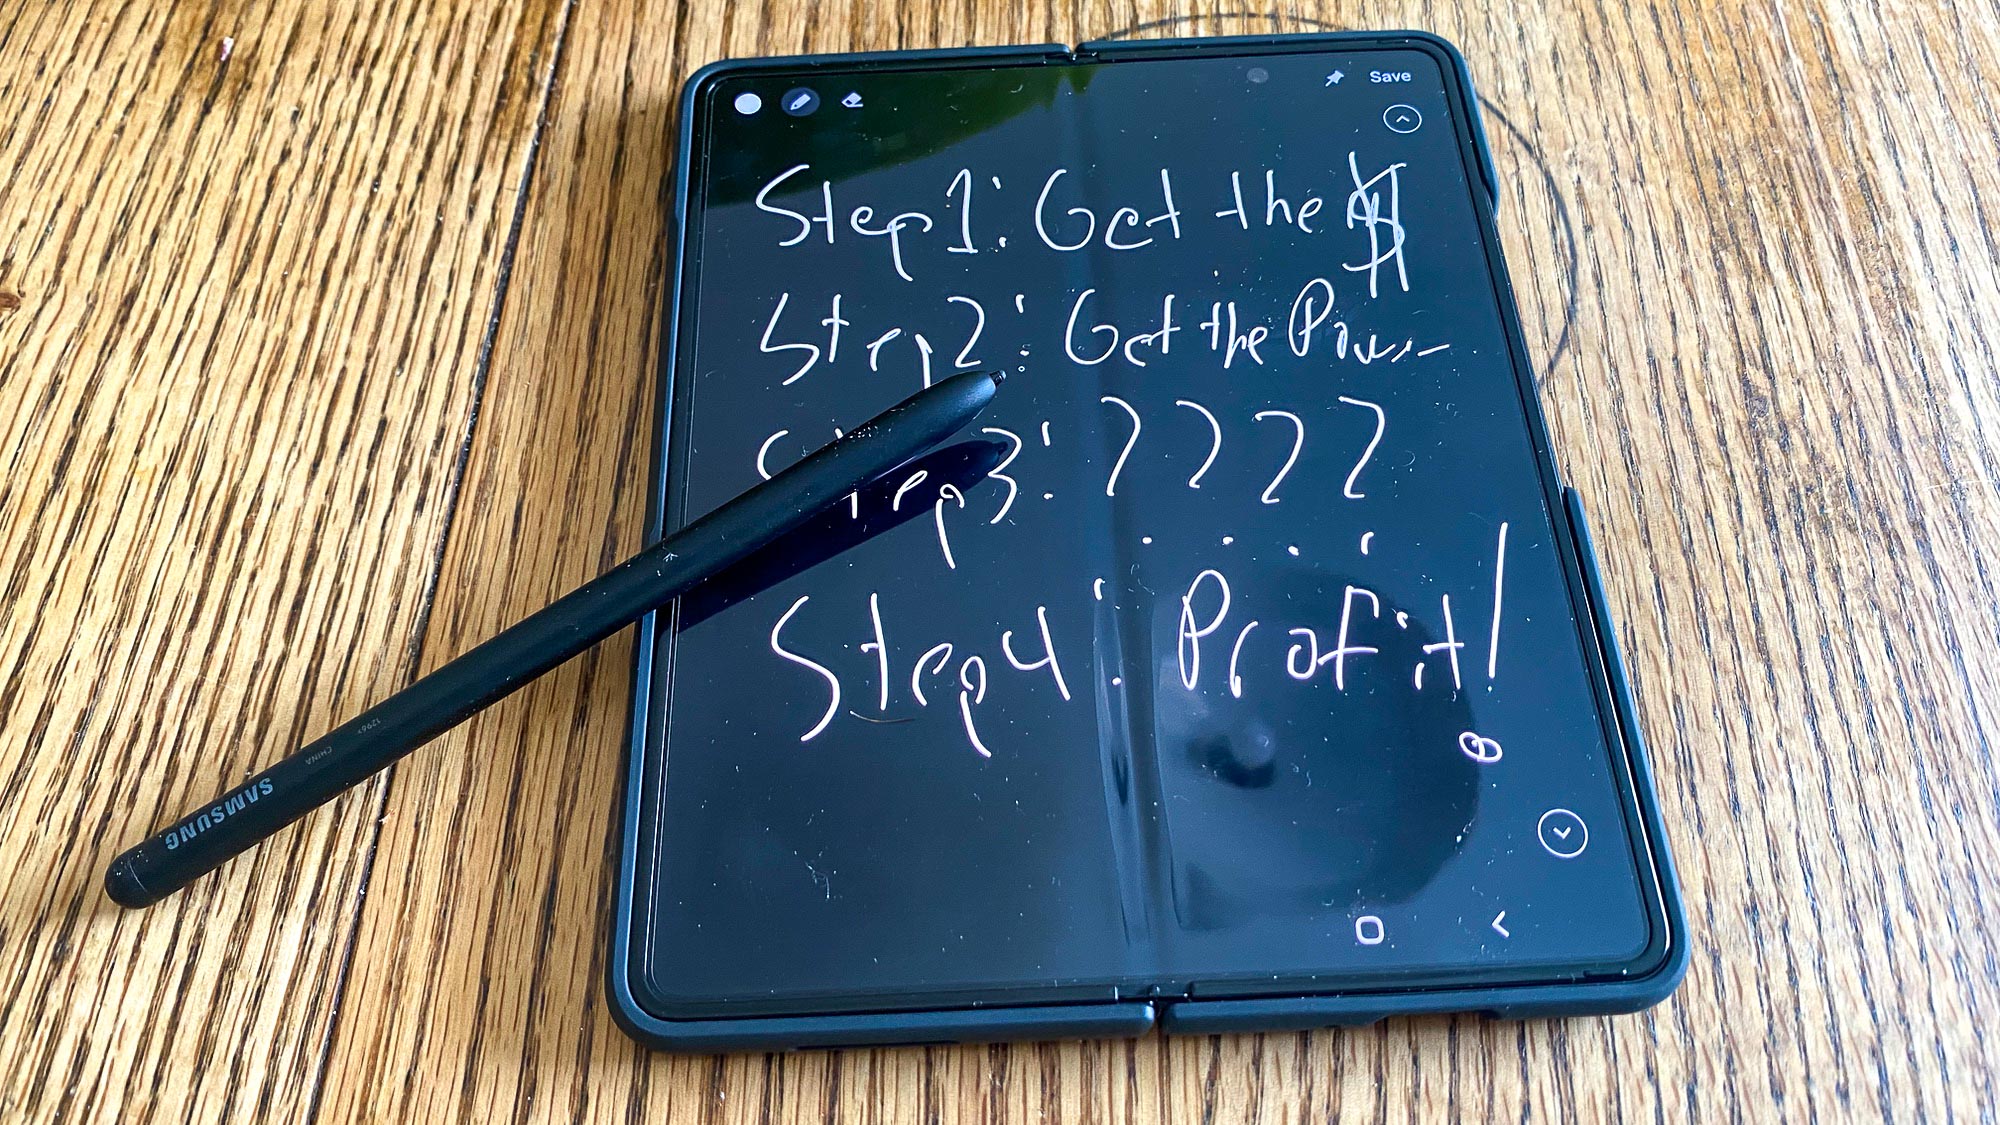 Galaxy Z Fold 3 and S Pen